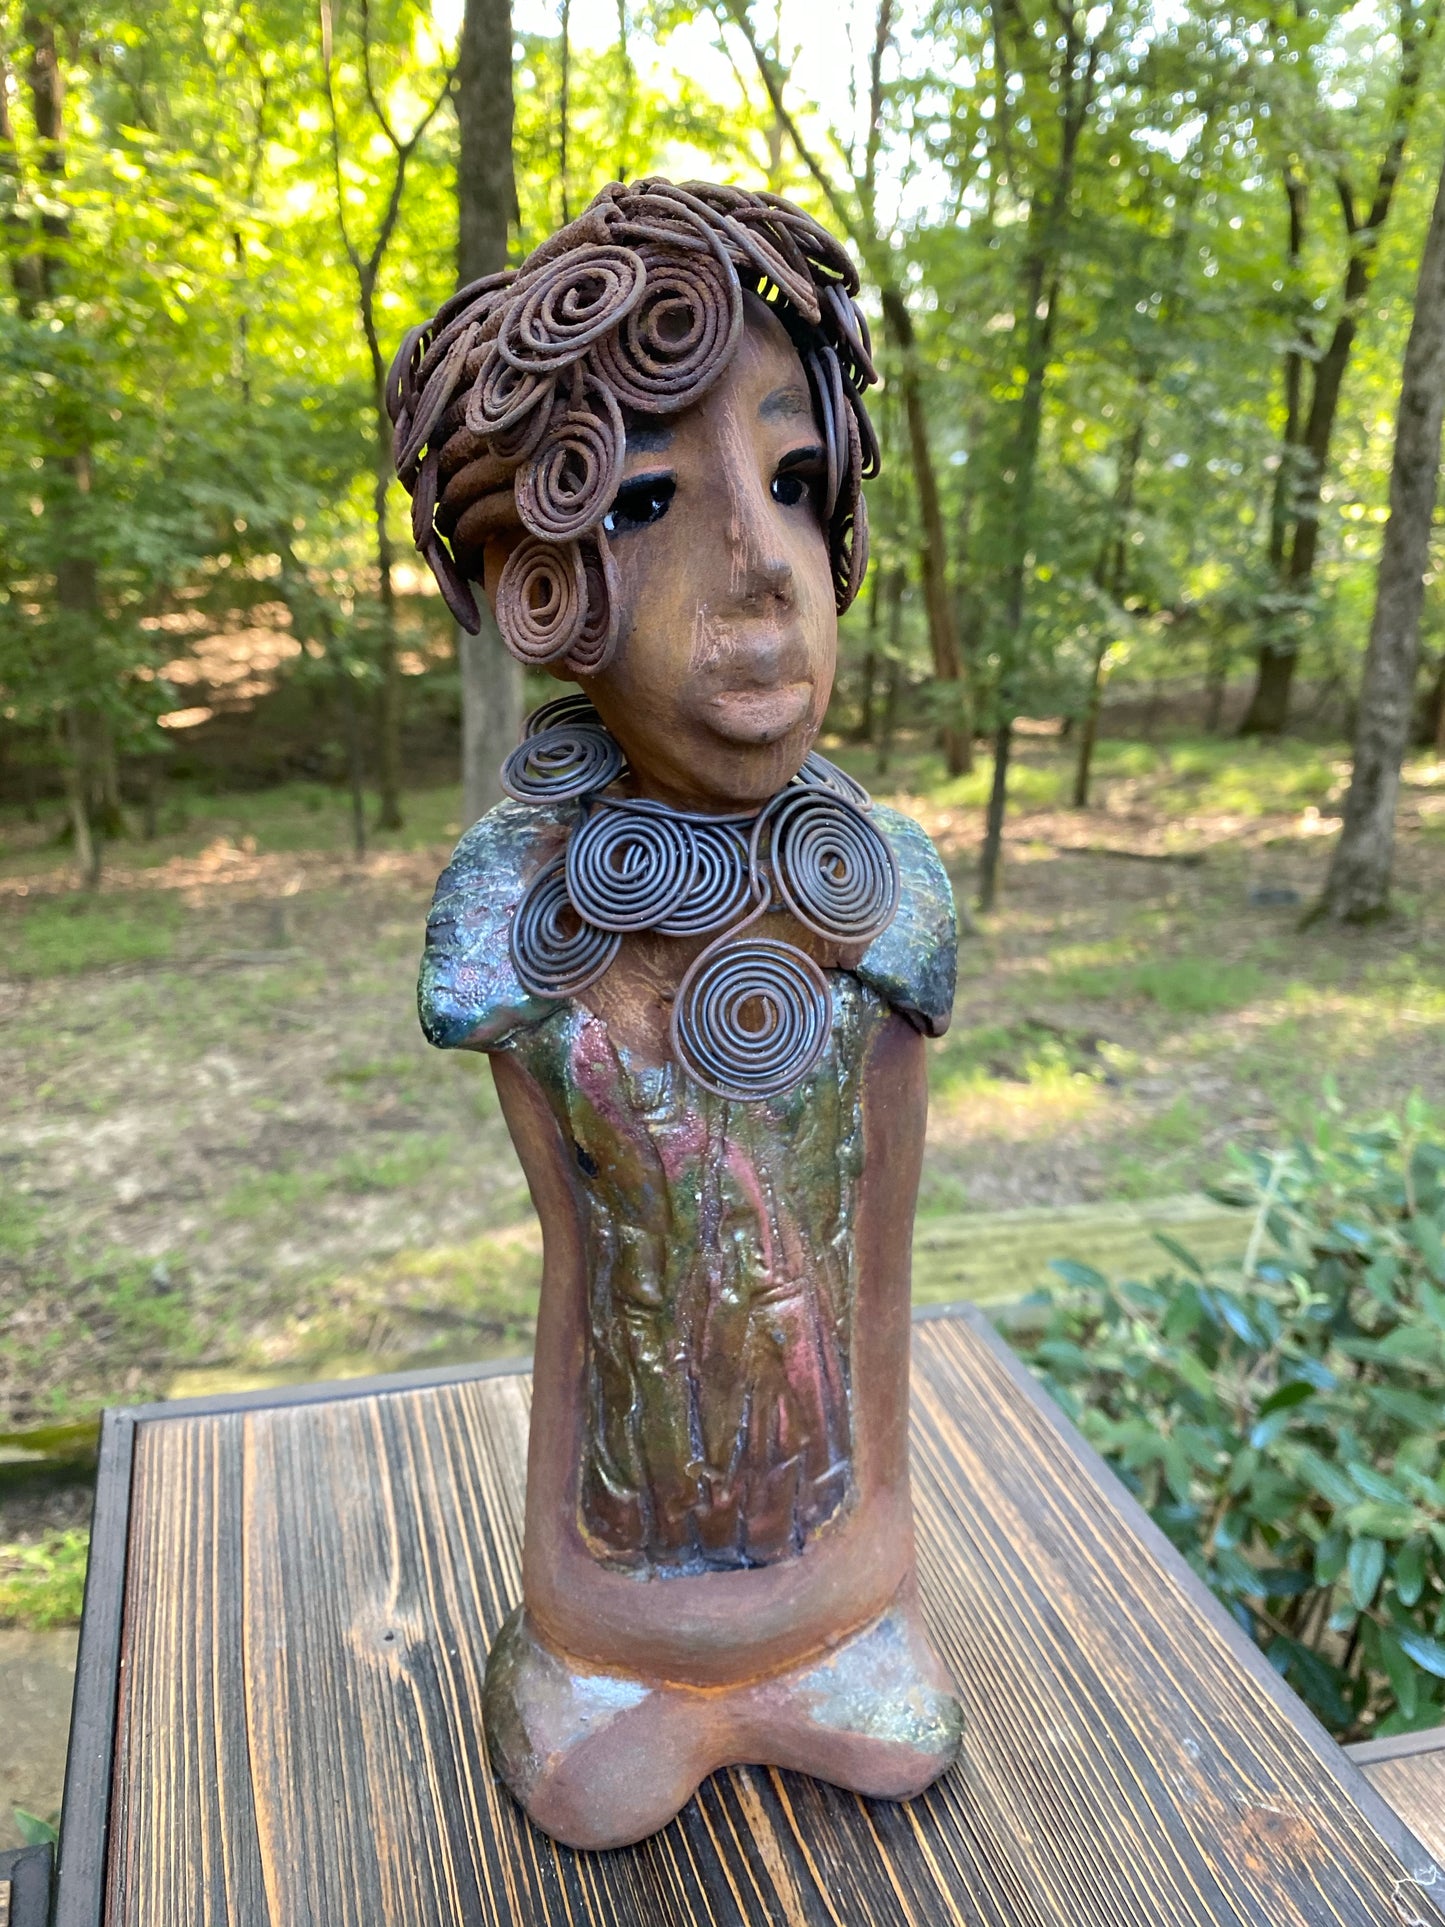 Meet Farida! Farida stand 13”x 5” x 4” and weighs 4 lbs. She has a bright eyes and a beautiful honey brown complexion. Farida has a fancy over the top Herdew. It took two hours to complete! A spiral 16 gauge necklace wraps around her neck. Her dress is a textured metallic green. Farida is looking for a new home.She would make a great gift to a BFF or just for YOU!